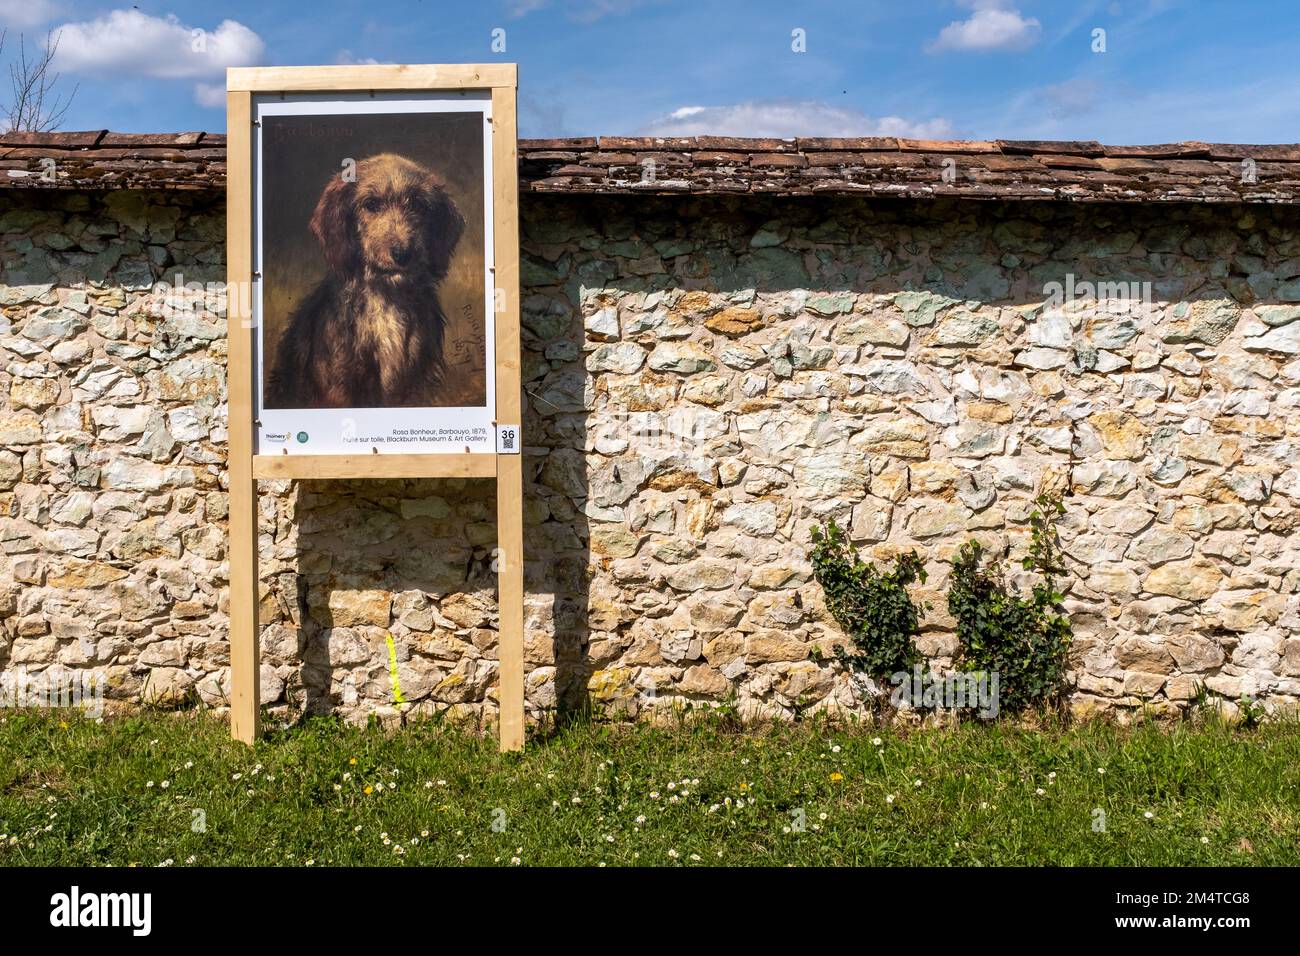 A reproduction of a 19th century painting showing a dog, installed outside against a limestone wall, taken in the town of Thomery, near Paris on an ea Stock Photo